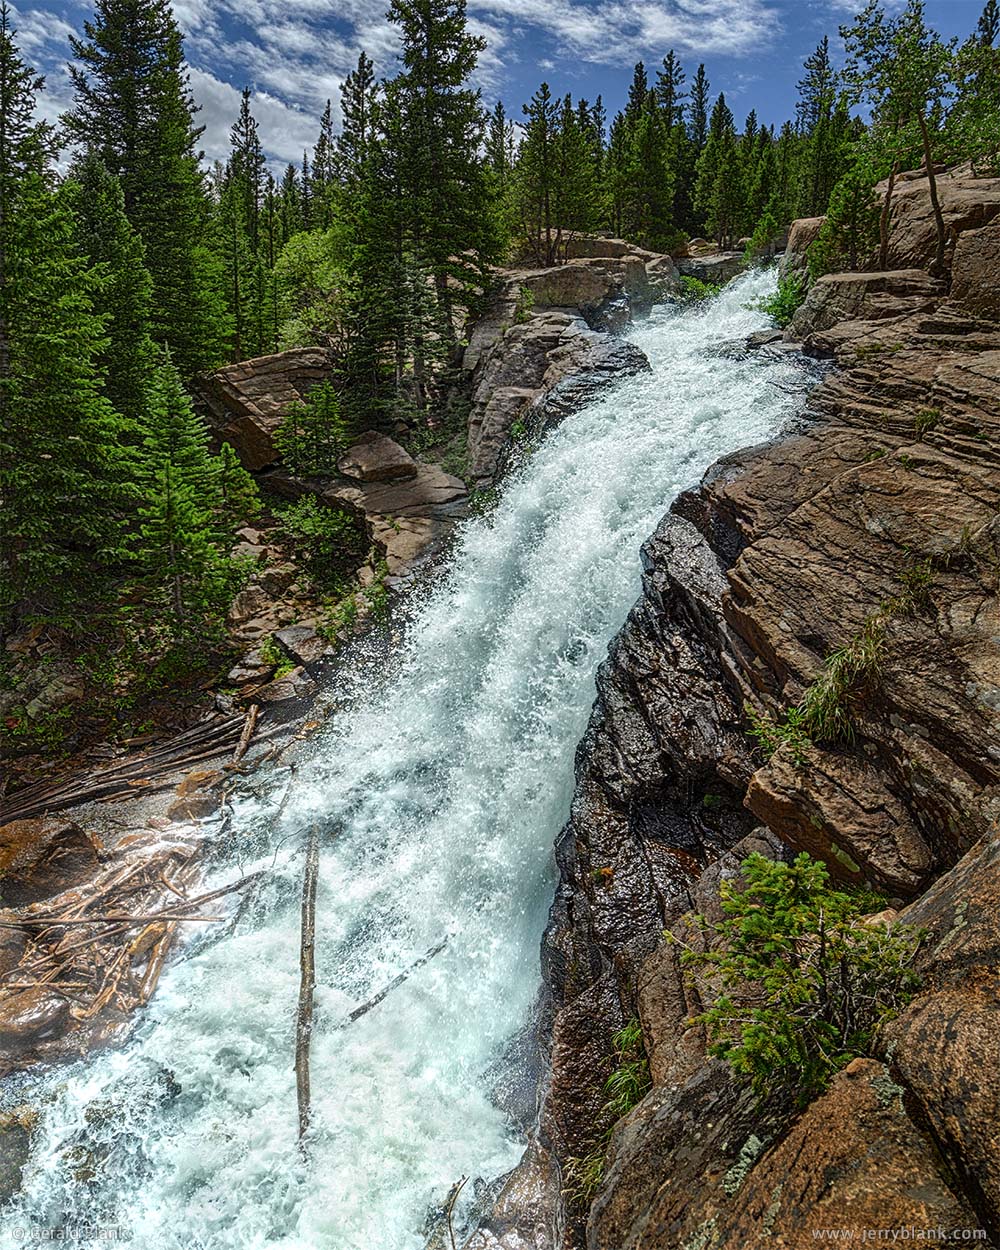 #22563 - Alberta Falls in Glacier Gorge, Rocky Mountain National Park, Colorado - photo by Jerry Blank